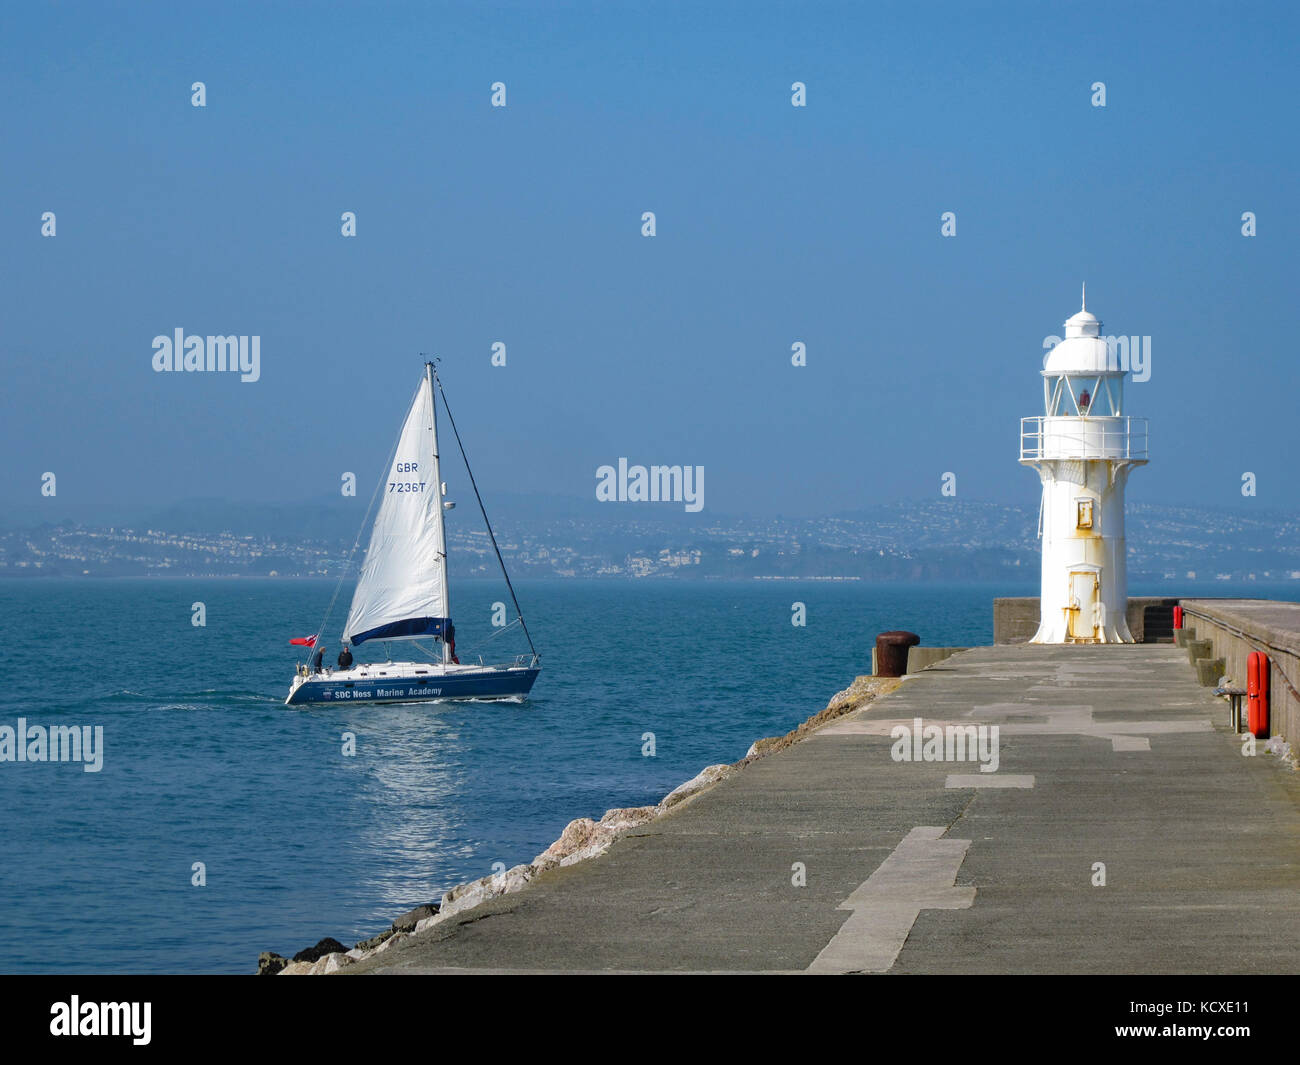 Sailboat, yacht passing the lighthouse on the end of the breakwater at Brixham, Torbay, English Riviera, Devon, UK. Summer. Copy space. Seafood Coast Stock Photo